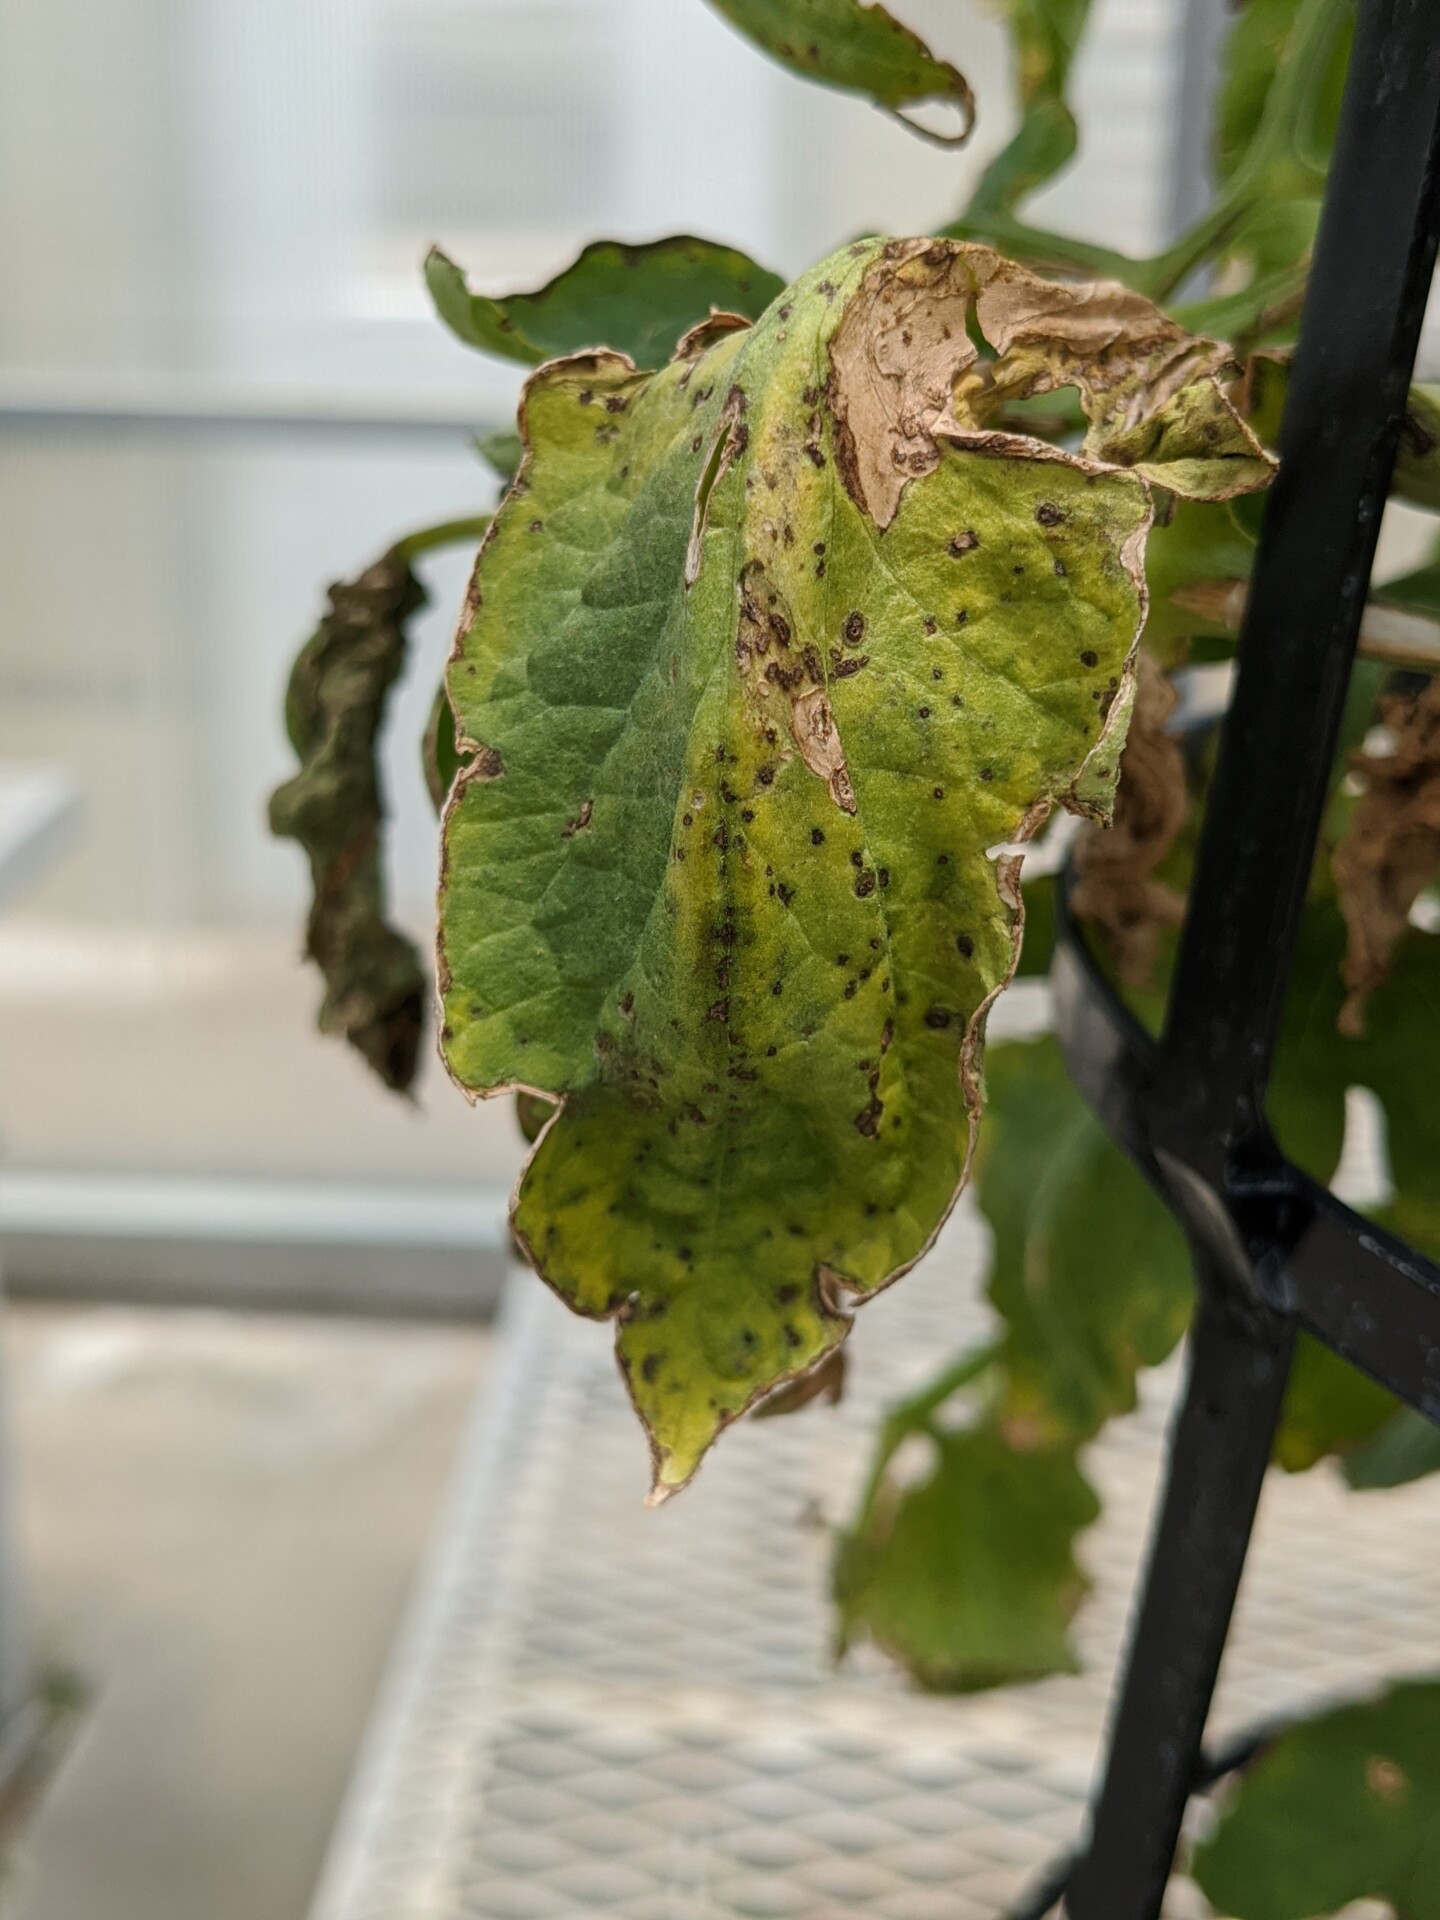 Lesions of bacterial spot on a tomato leaf.